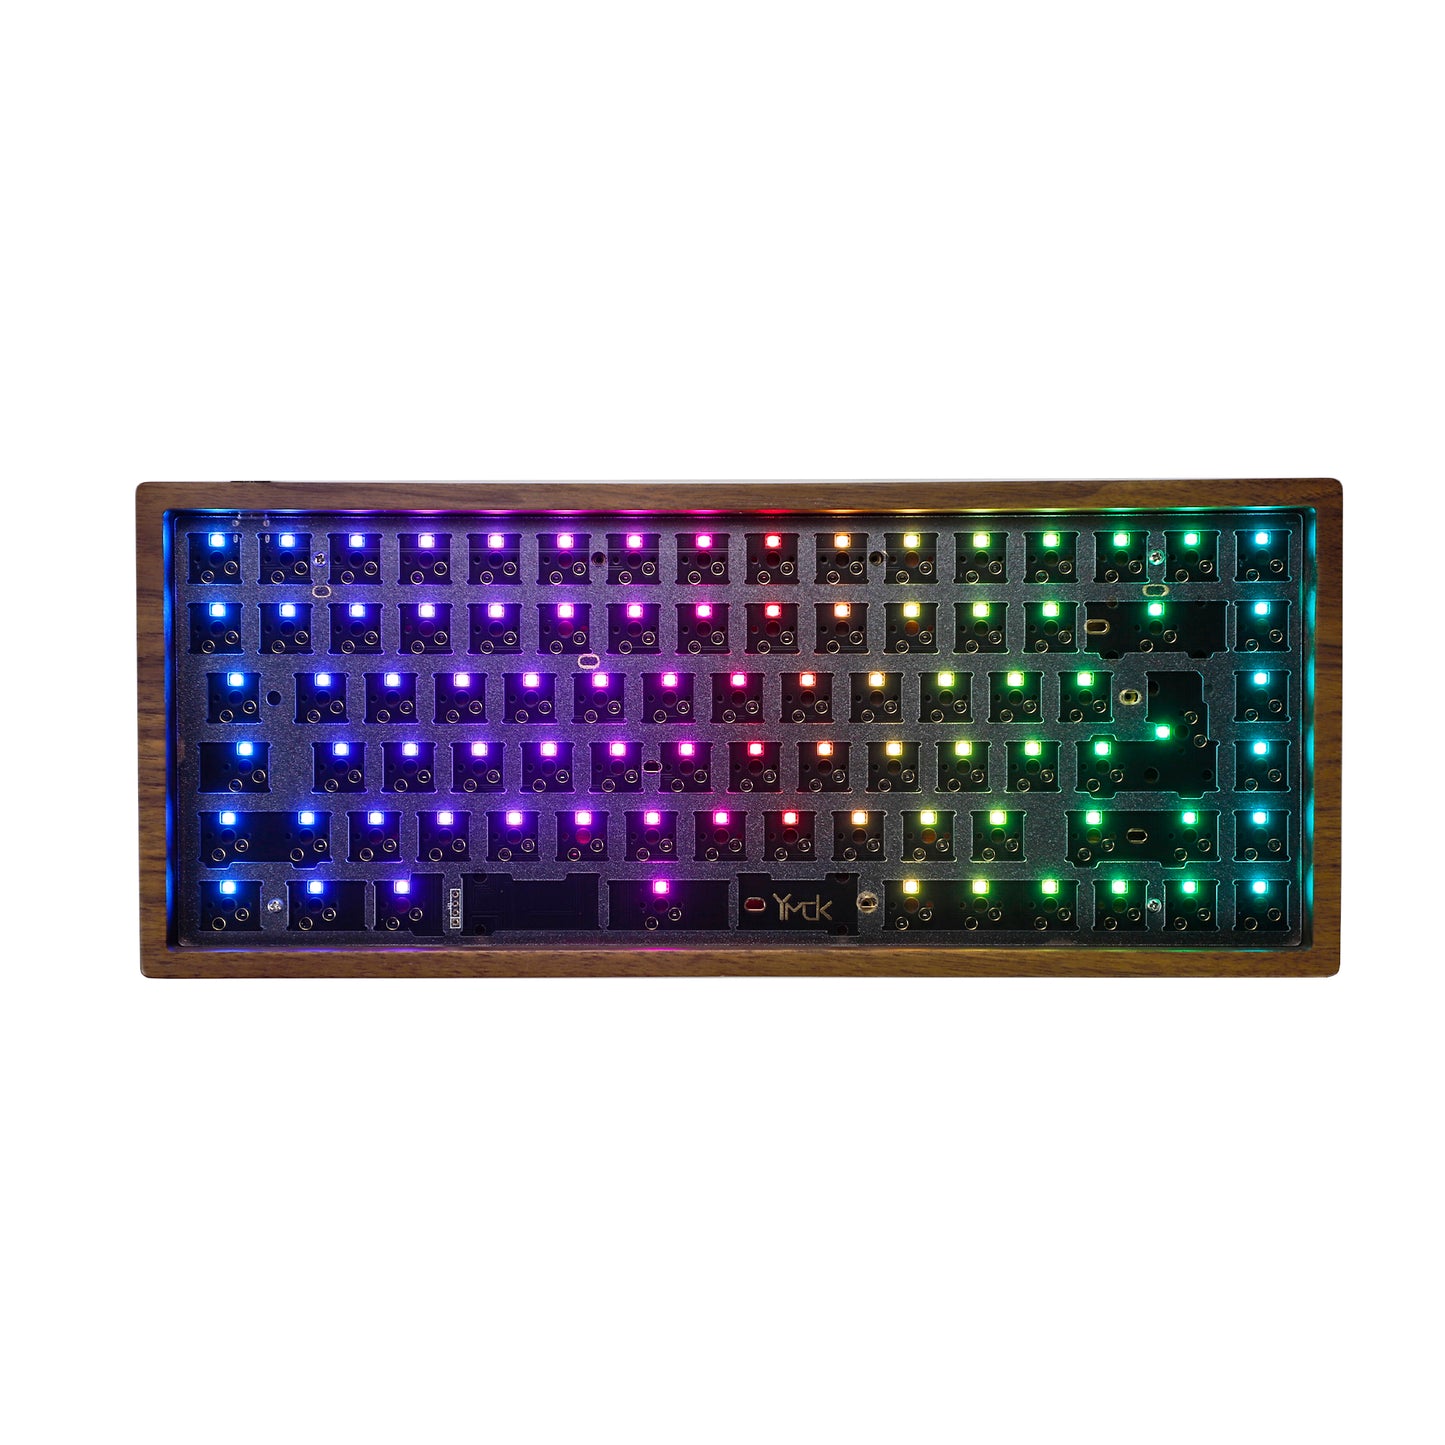 YMD75% YMD84 Wood RGB Kit(ANSI or ISO Layout North Facing VIA VIAL Fully Programmable)